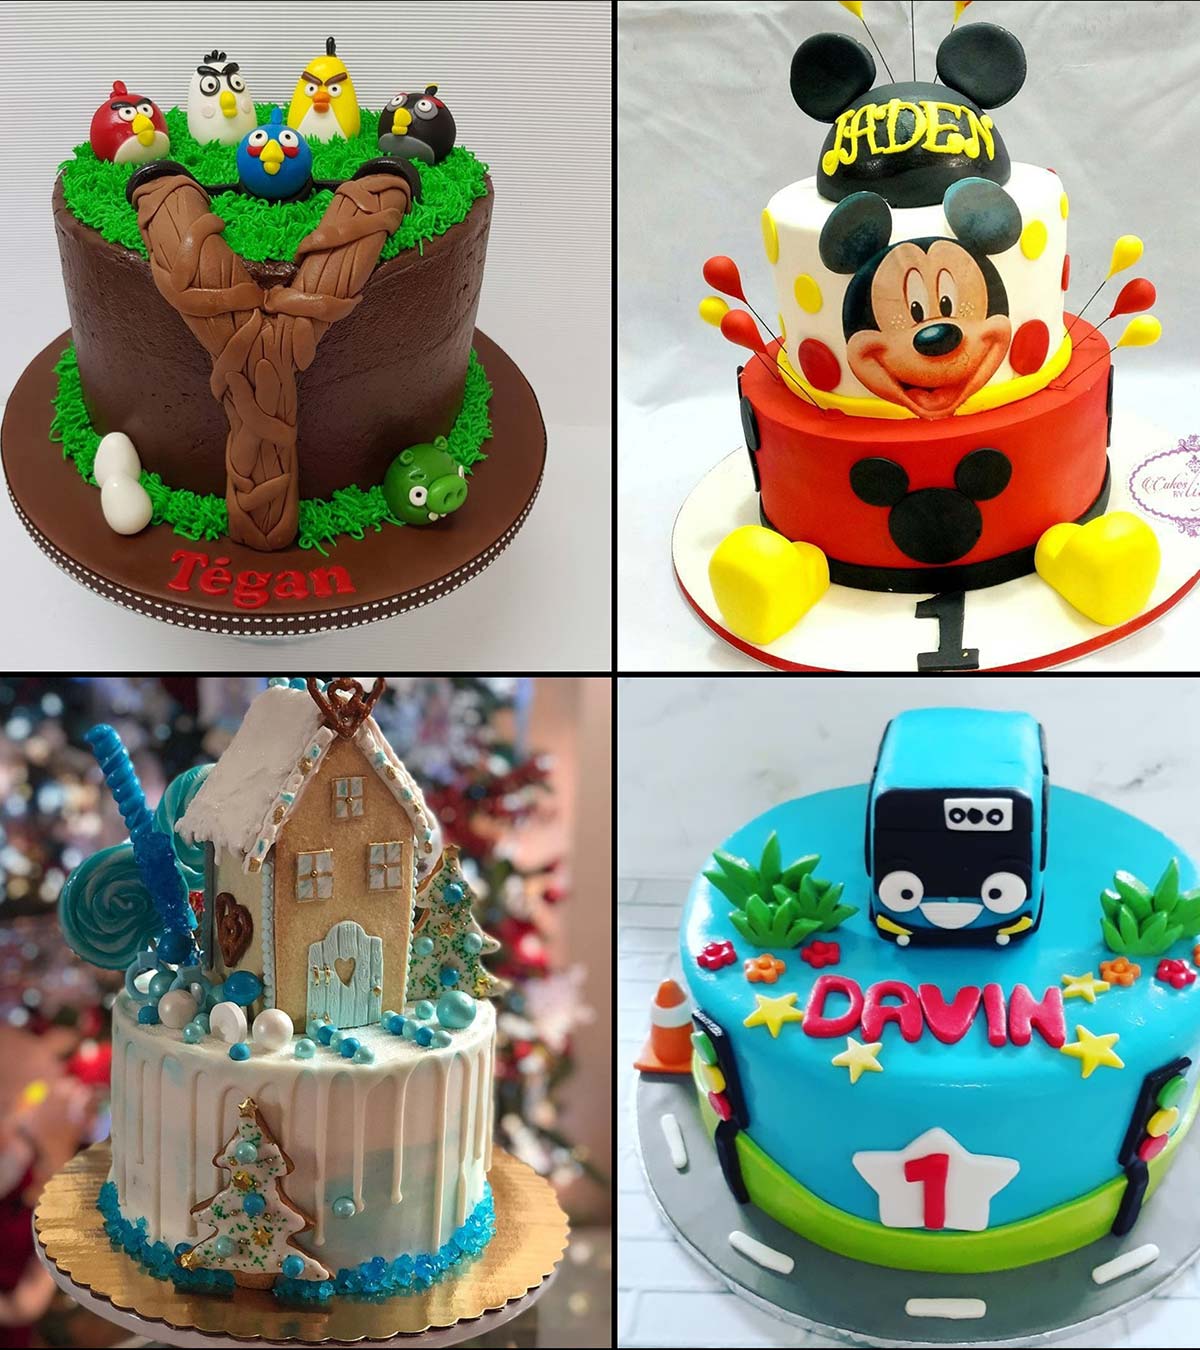 39 Awesome Ideas For Your Baby S 1st Birthday Cakes,Small Front Yard Designs Pictures